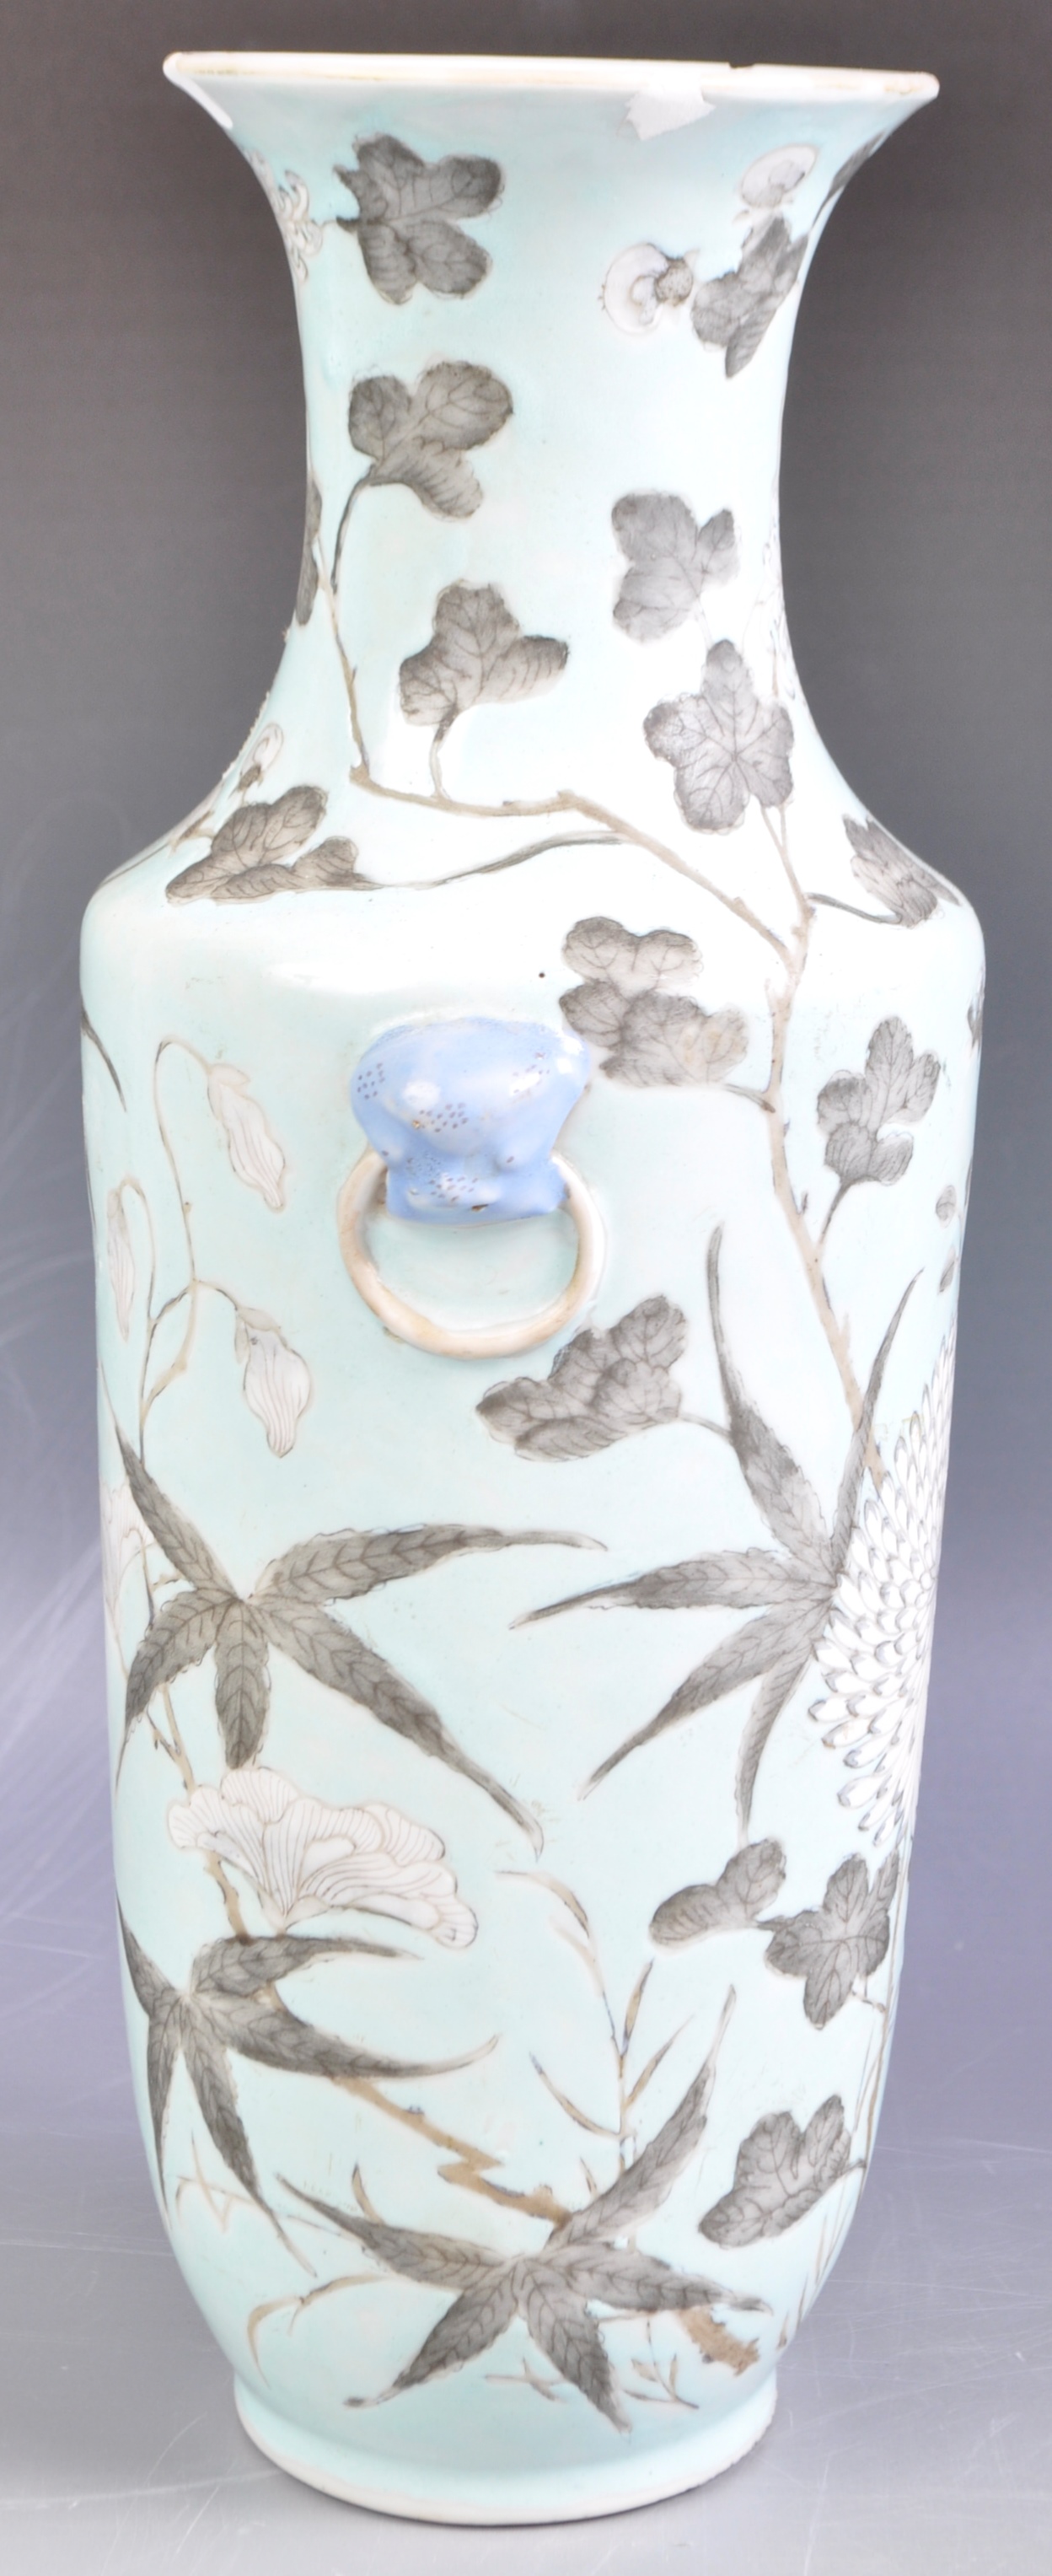 ANTIQUE 19TH CENTURY CHINESE PORCELAIN ROULEAU VASE IN TEAL - Image 3 of 7